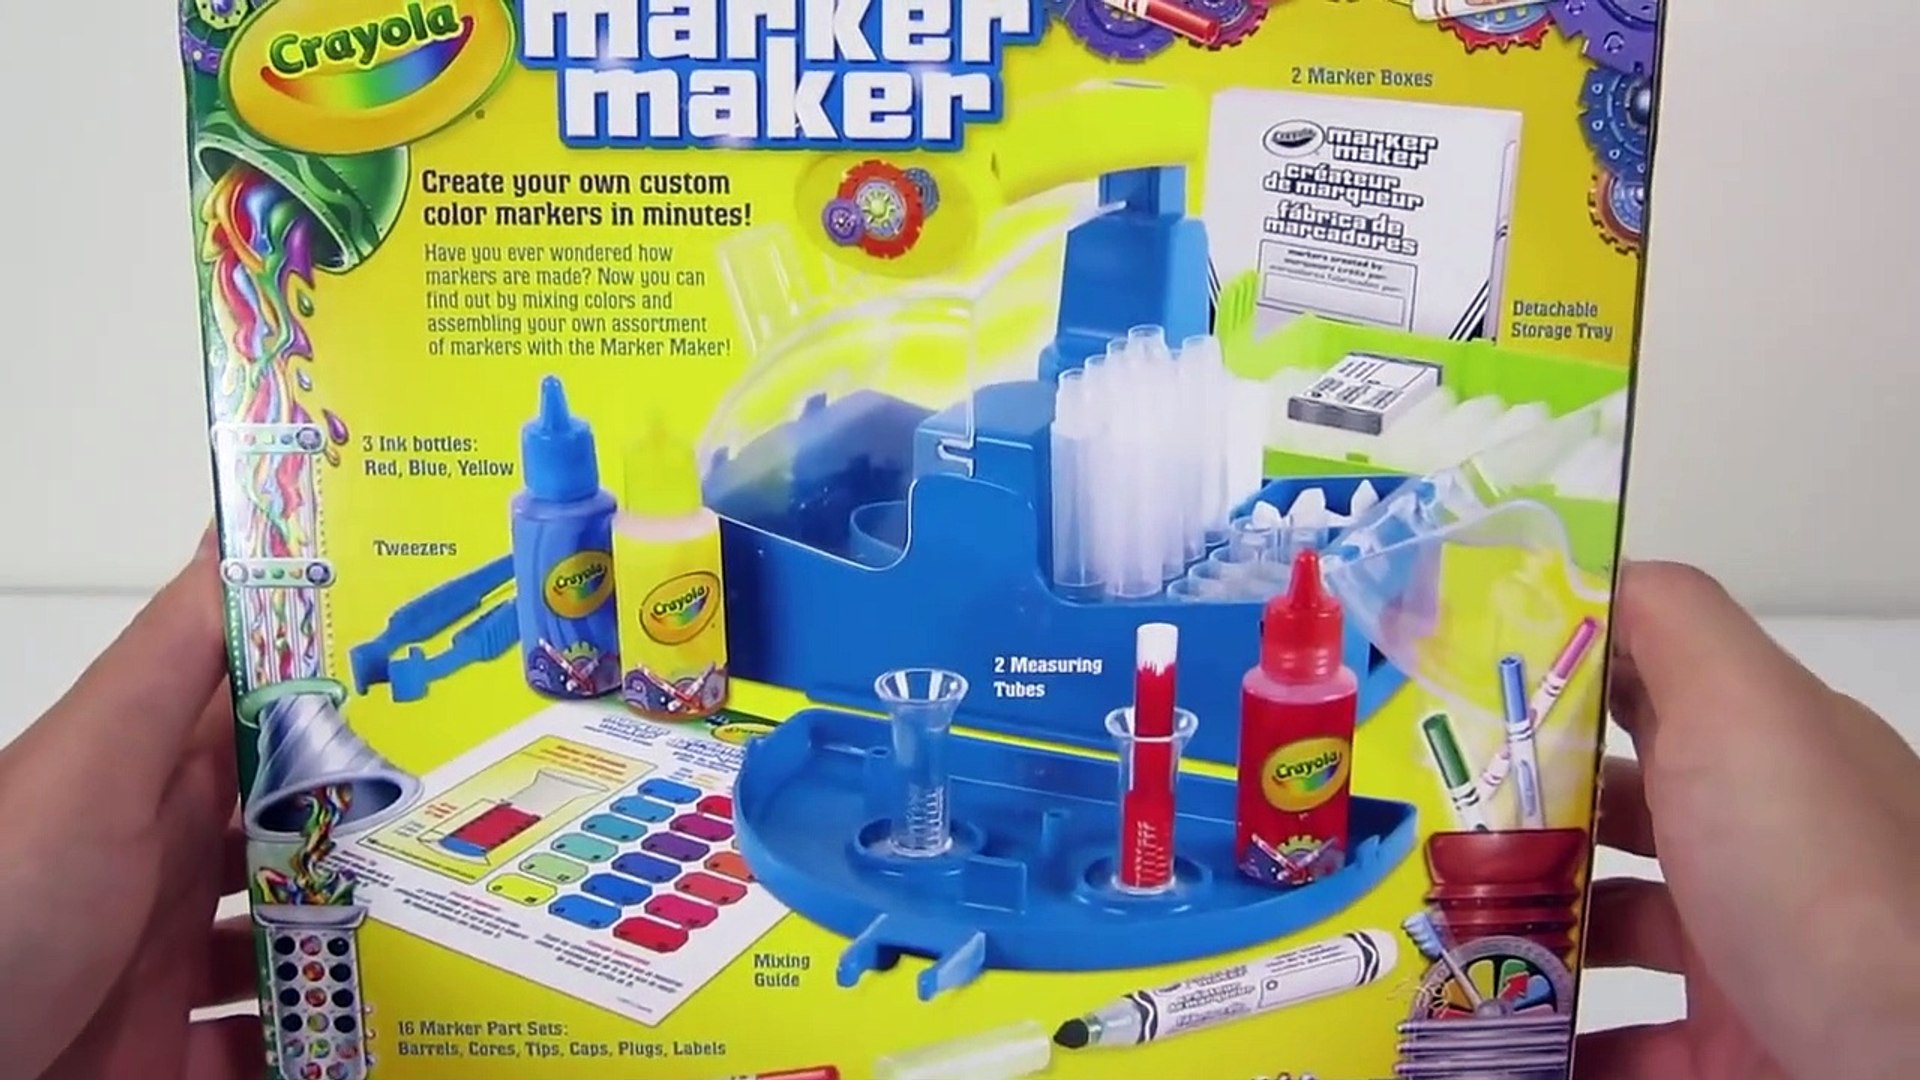 Brand New Crayola Marker Maker Kit, Make Your Own Markers